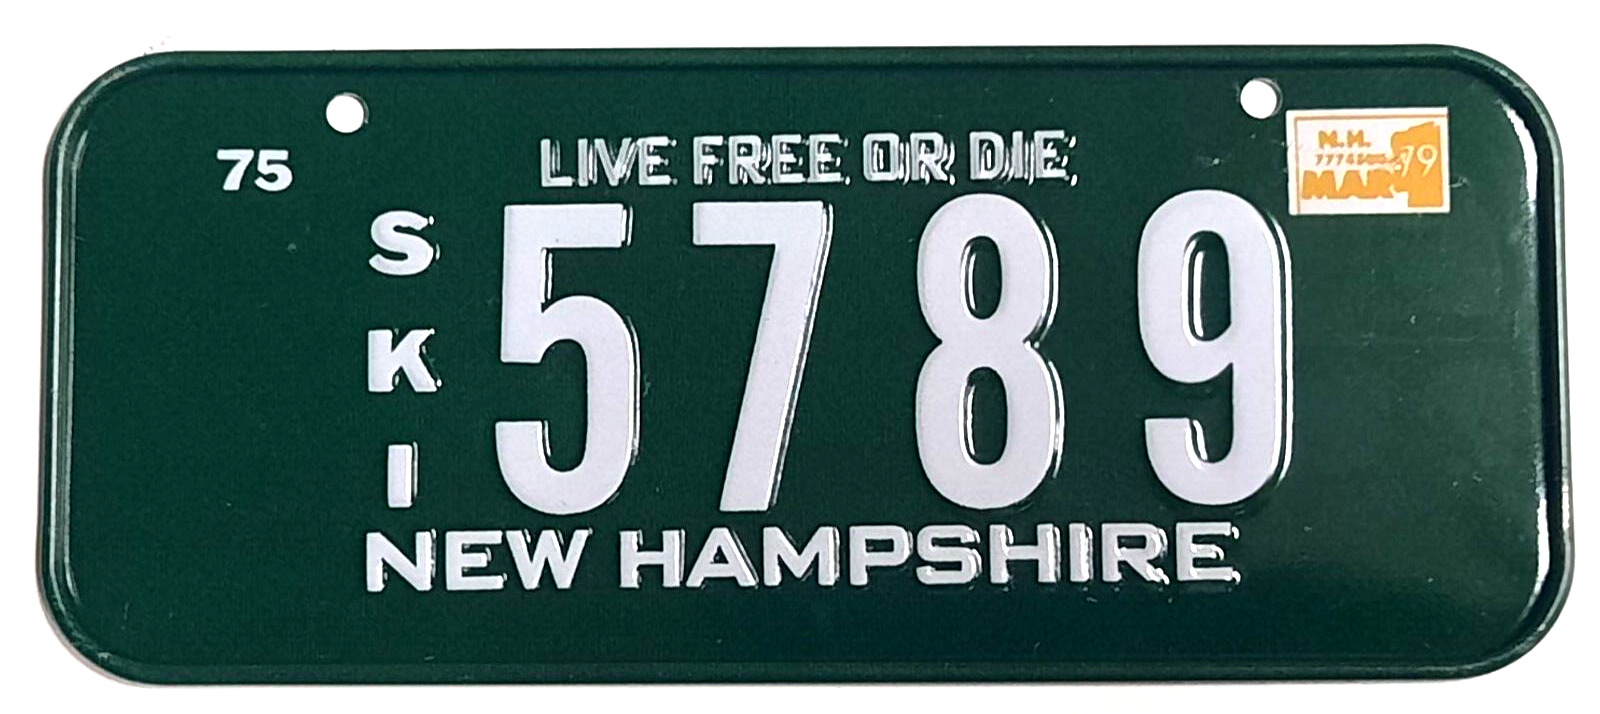 Vintage 1979 NEW HAMPSHIRE bicycle license plate cereal premium